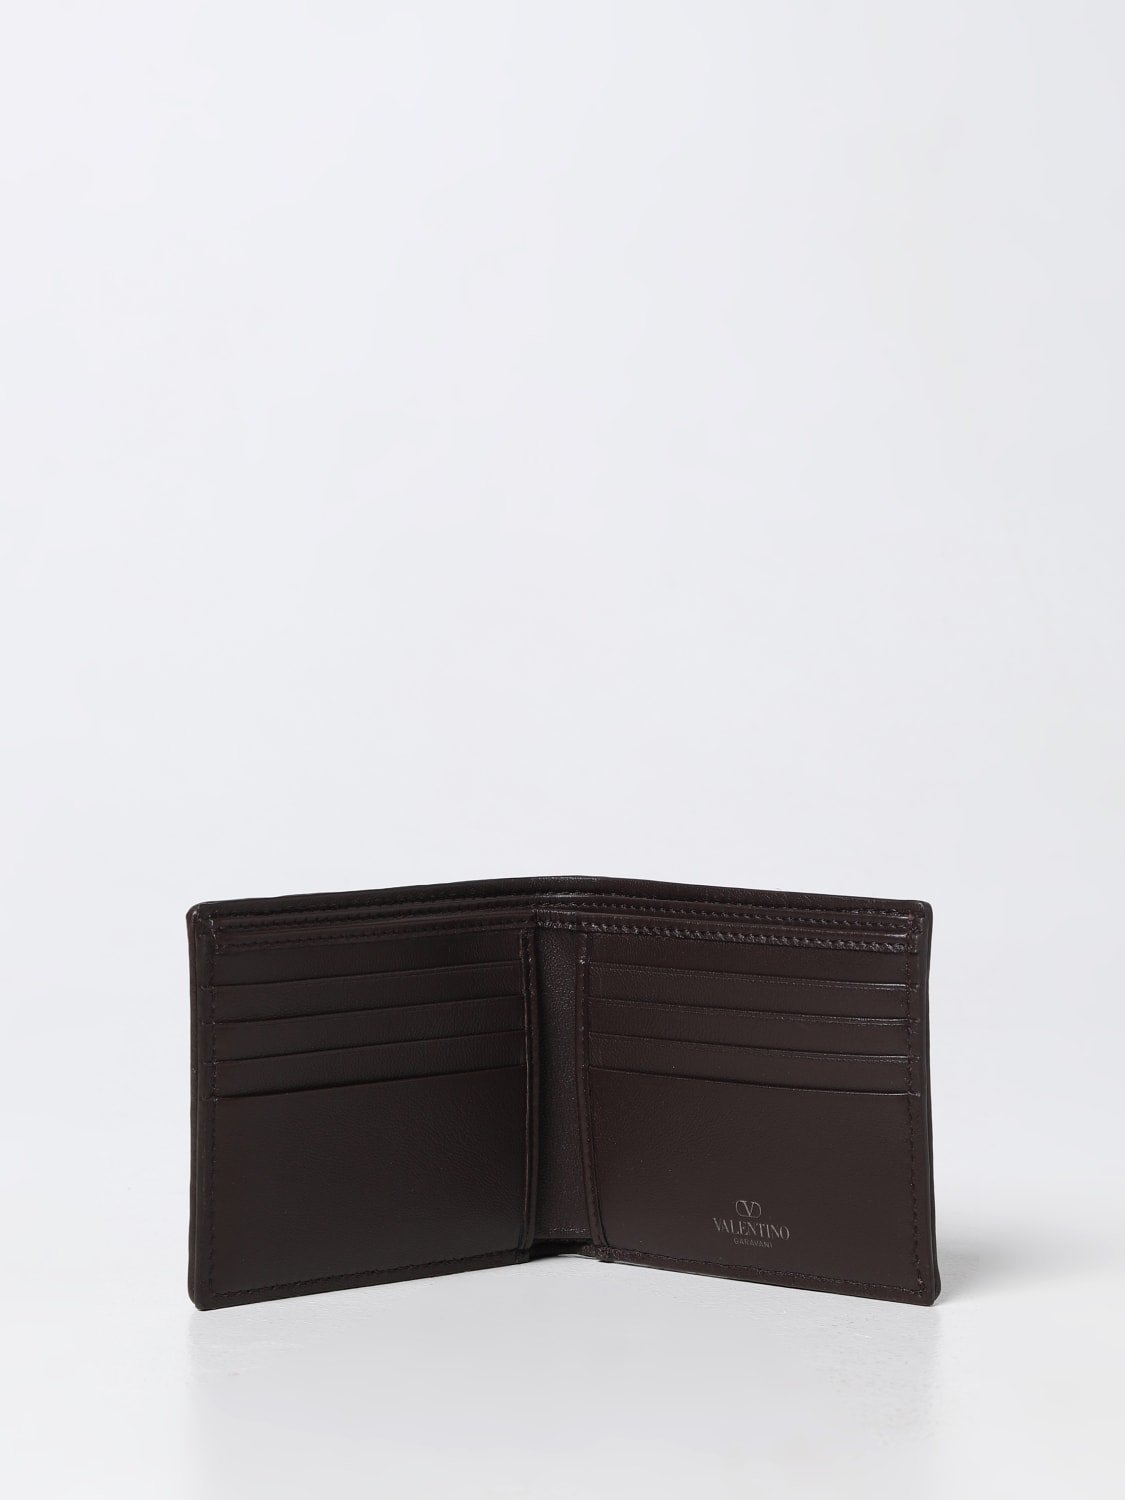 Toile Iconographe Cardholder With Leather Details for Man in Beige/black